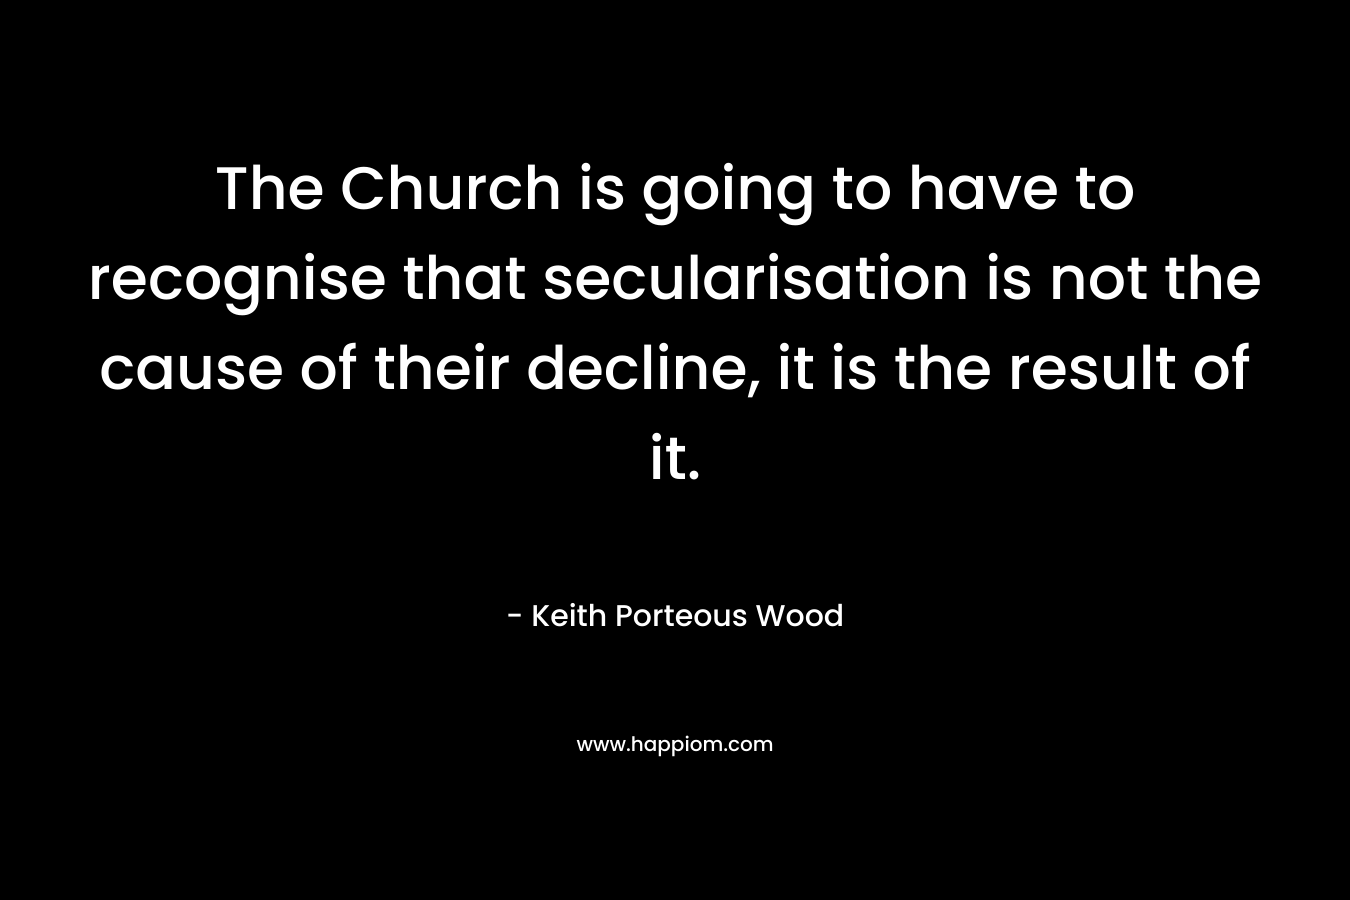 The Church is going to have to recognise that secularisation is not the cause of their decline, it is the result of it.